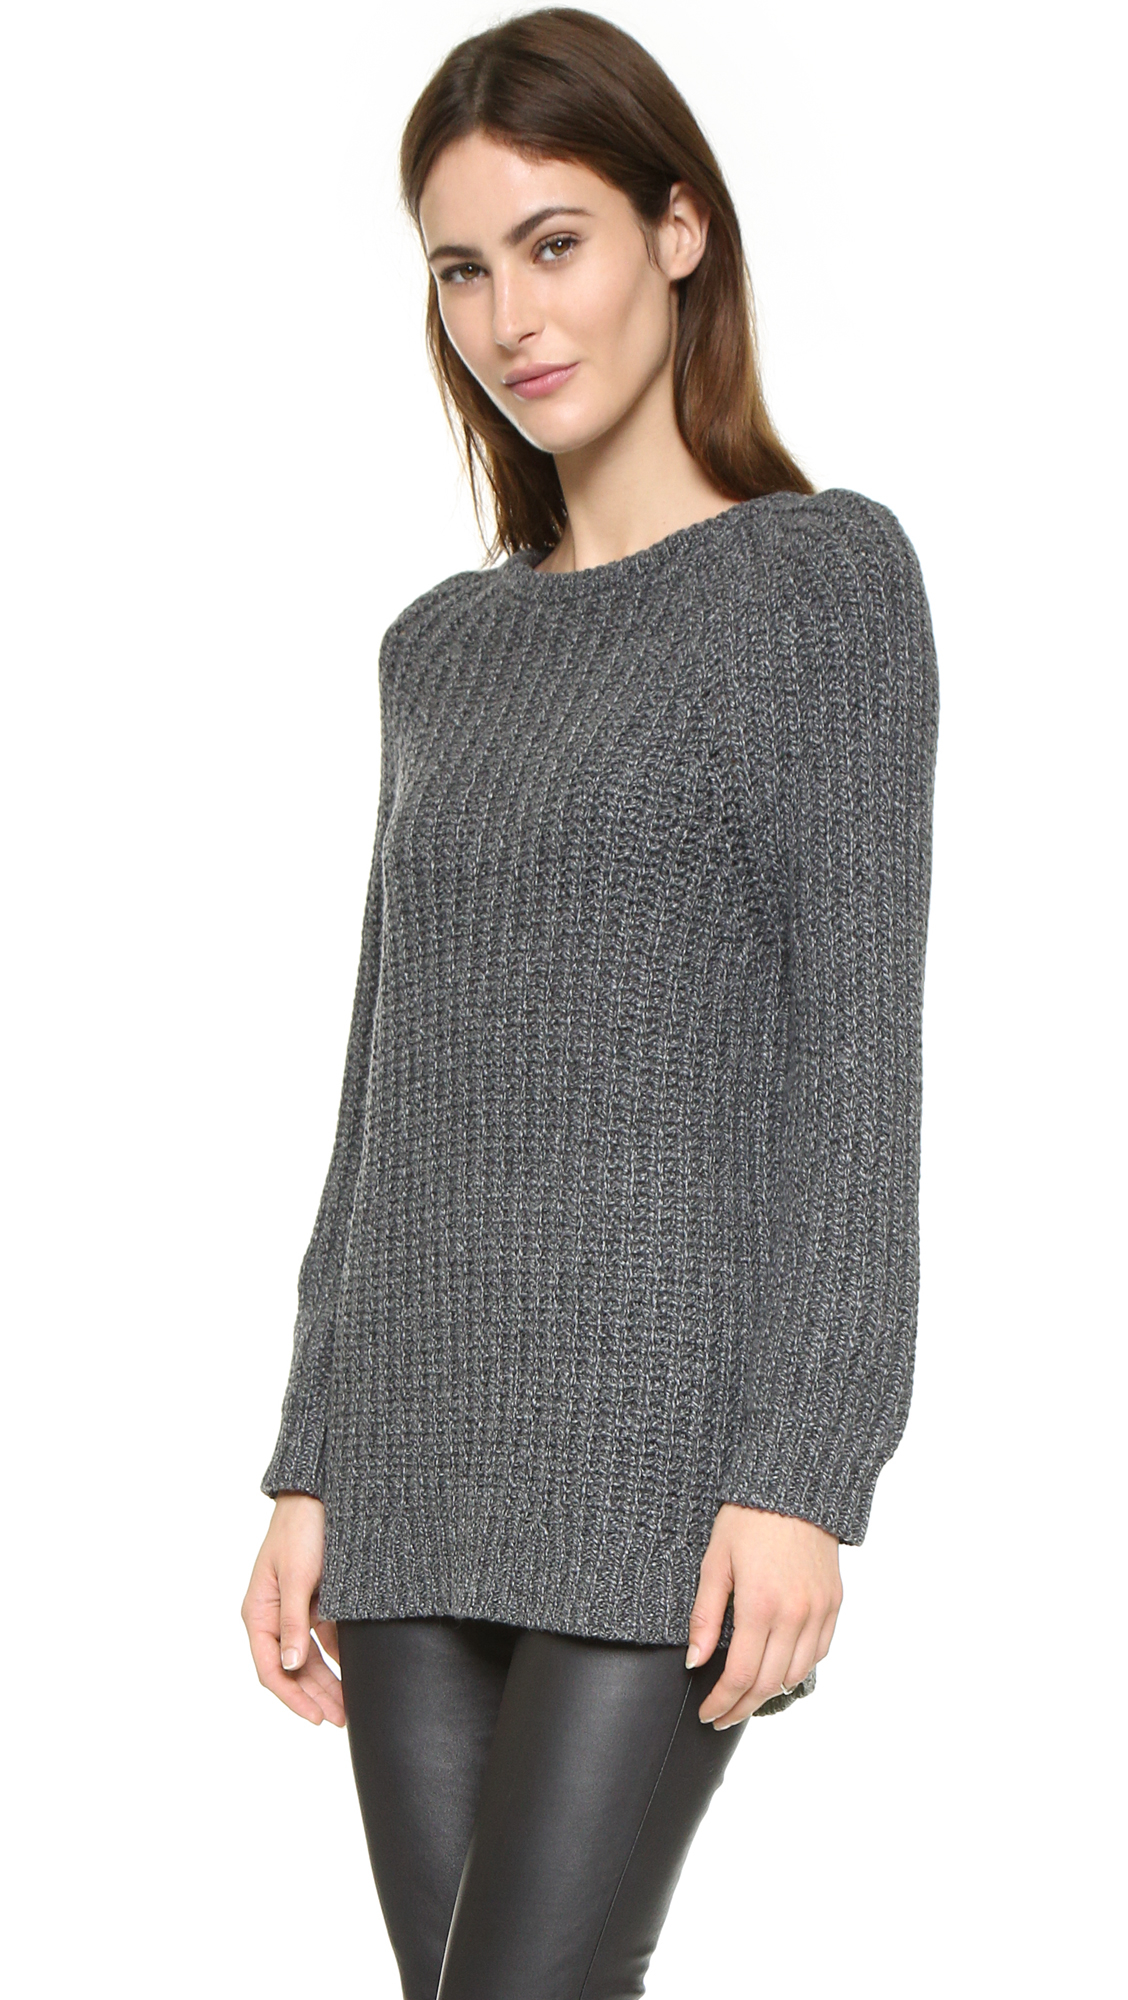 Alice + Olivia Chunky Marled Sweater in Charcoal (Gray) - Lyst